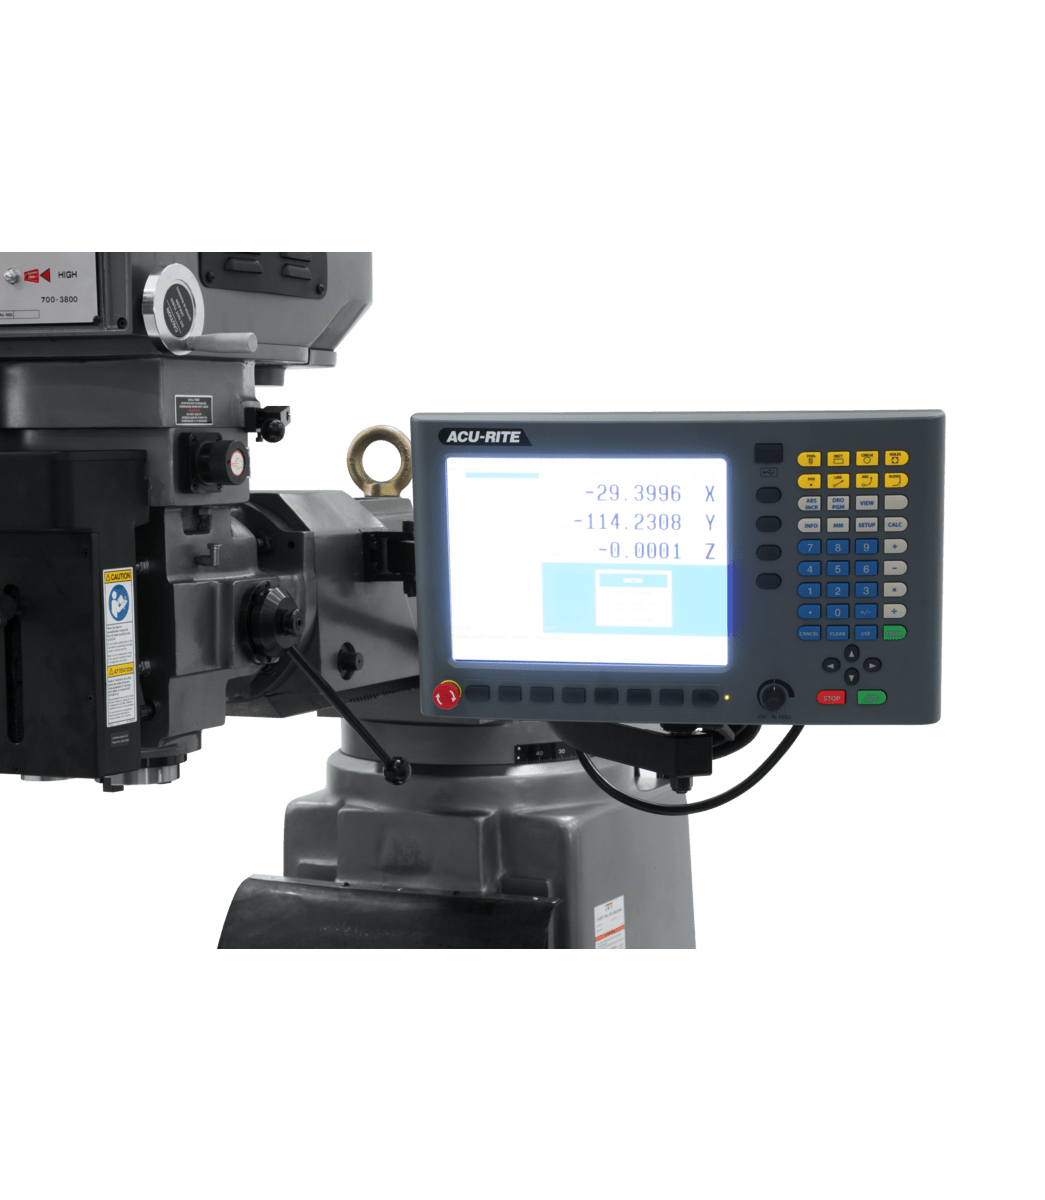 JTM-1050EVS2/230 Mill With 3-Axis Acu-Rite MilPwr G2 CNC Controller with Air Powered Drawbar - Jet